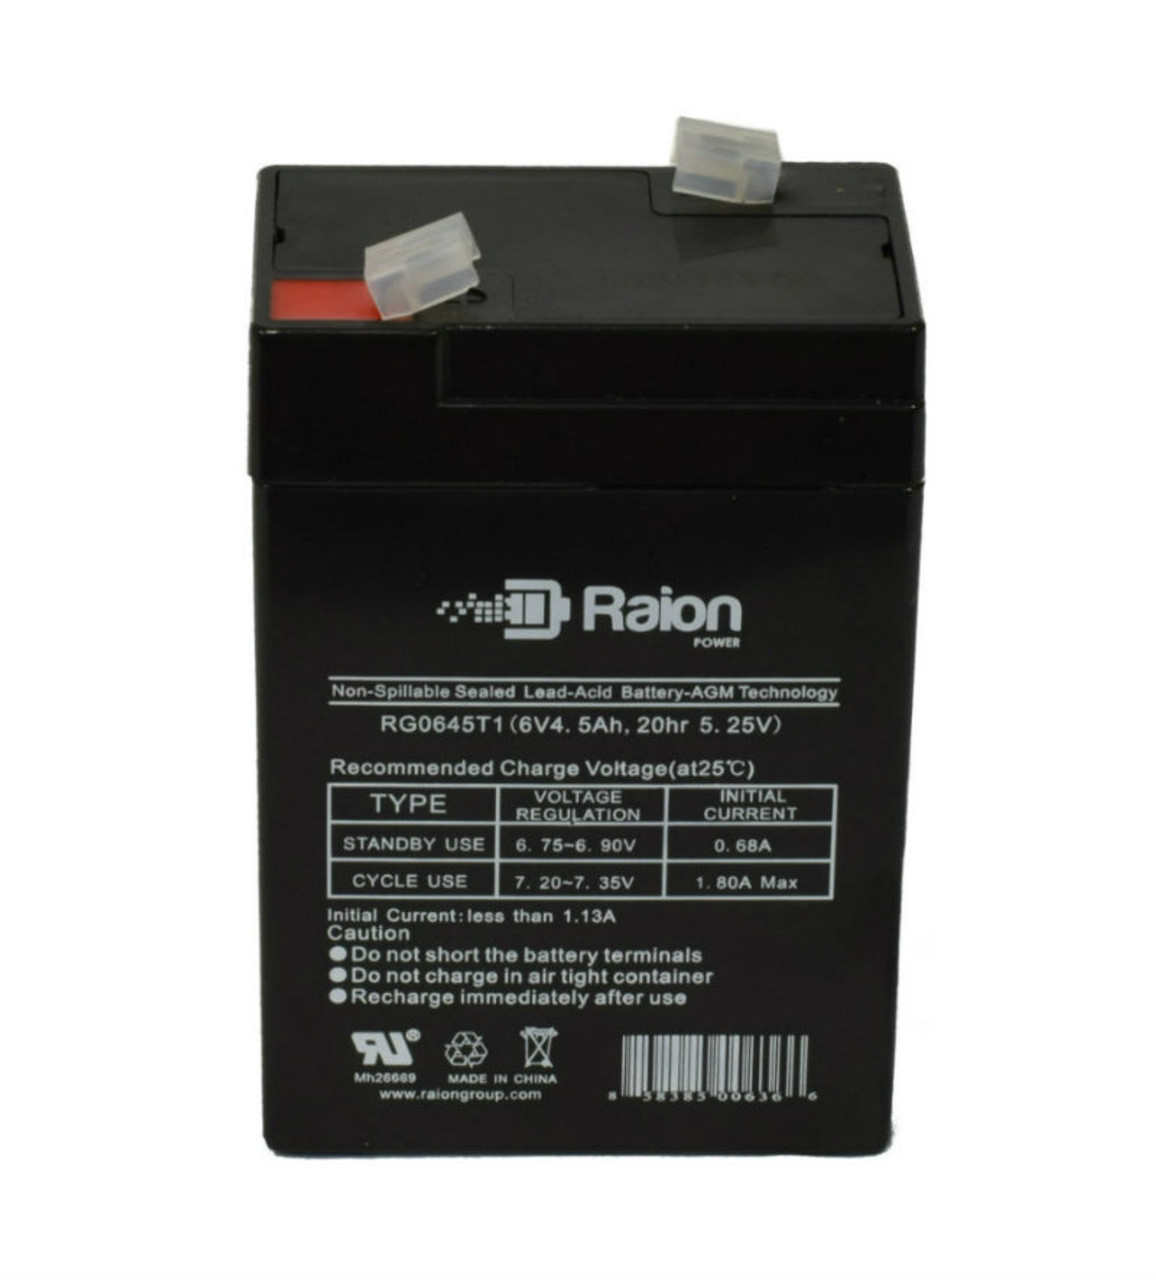 Raion Power RG0645T1 Replacement Battery Cartridge for Peg Perego ED1030 6V Grinta XL Police